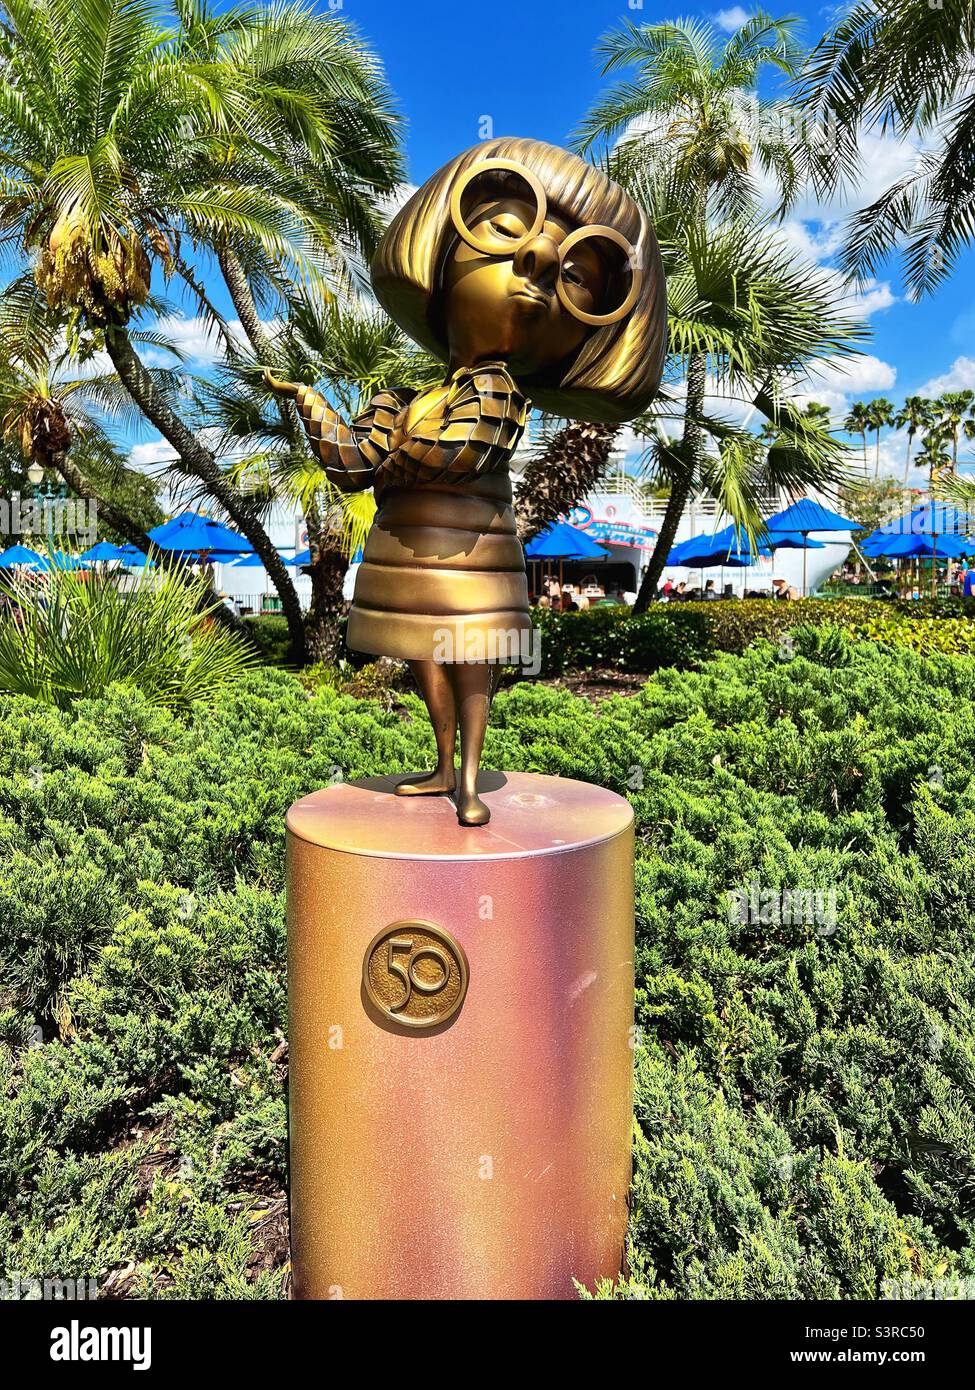 Walt Disney World 50th Anniversary statue of Edna Mode - 1 of 50 Statues in Gold at Hollywood Studios in Orlando - Florida Stock Photo